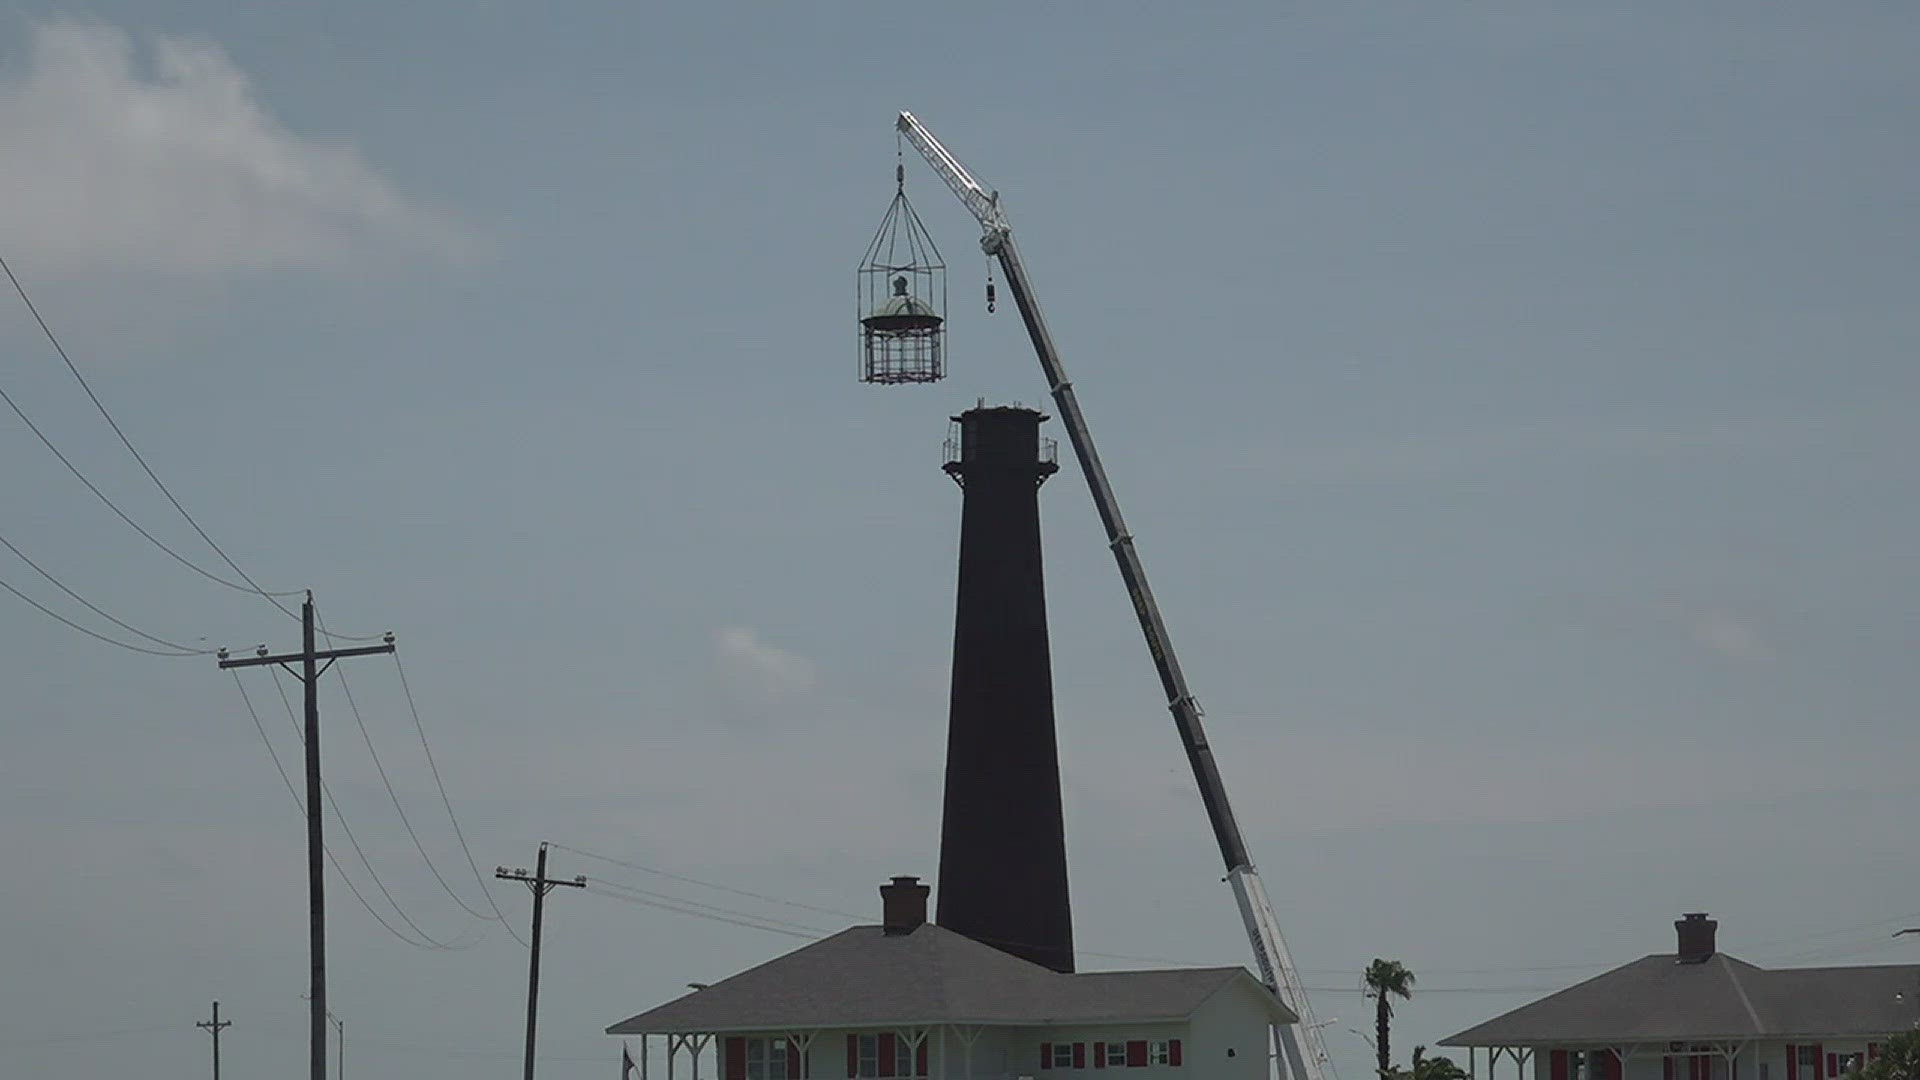 The efforts of Texas organization are paying off, and now, a structure known as a beacon on the upper Texas coast may soon shine again.